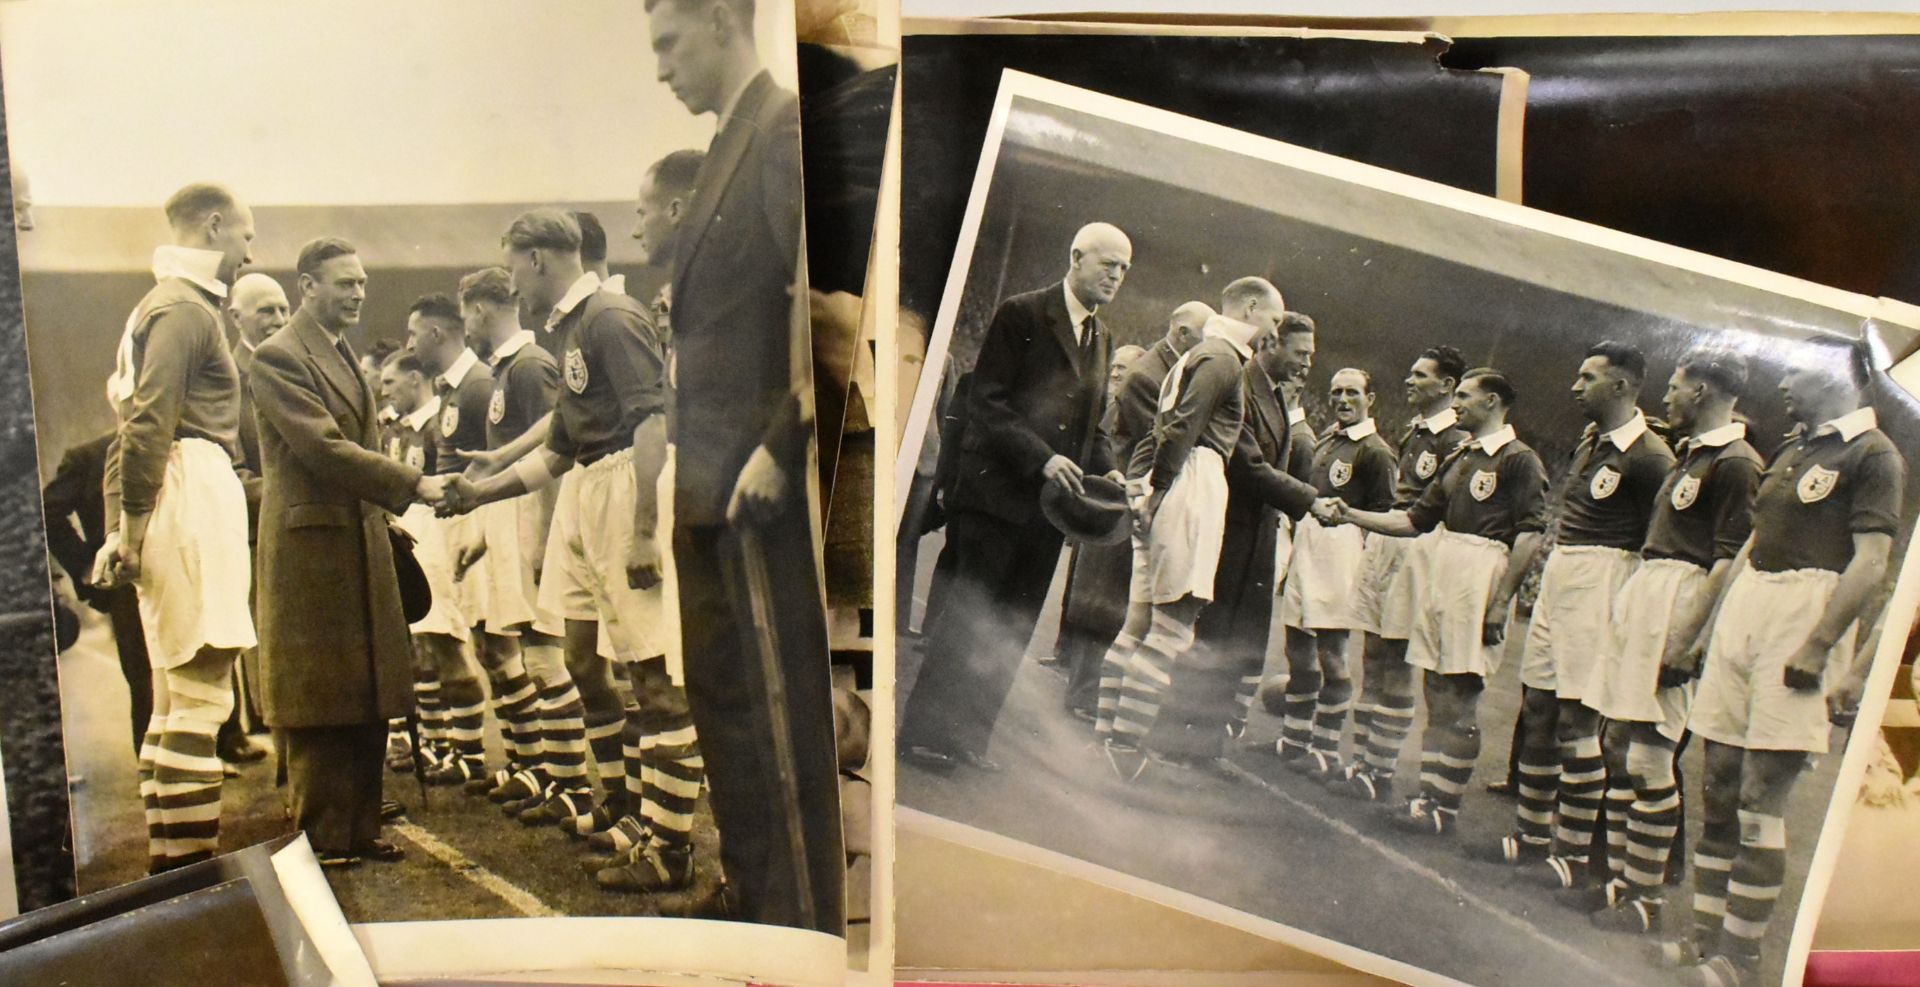 FOOTBALL - COLLECTION OF 1940S PRESS PHOTOGRAPHS - Image 3 of 5